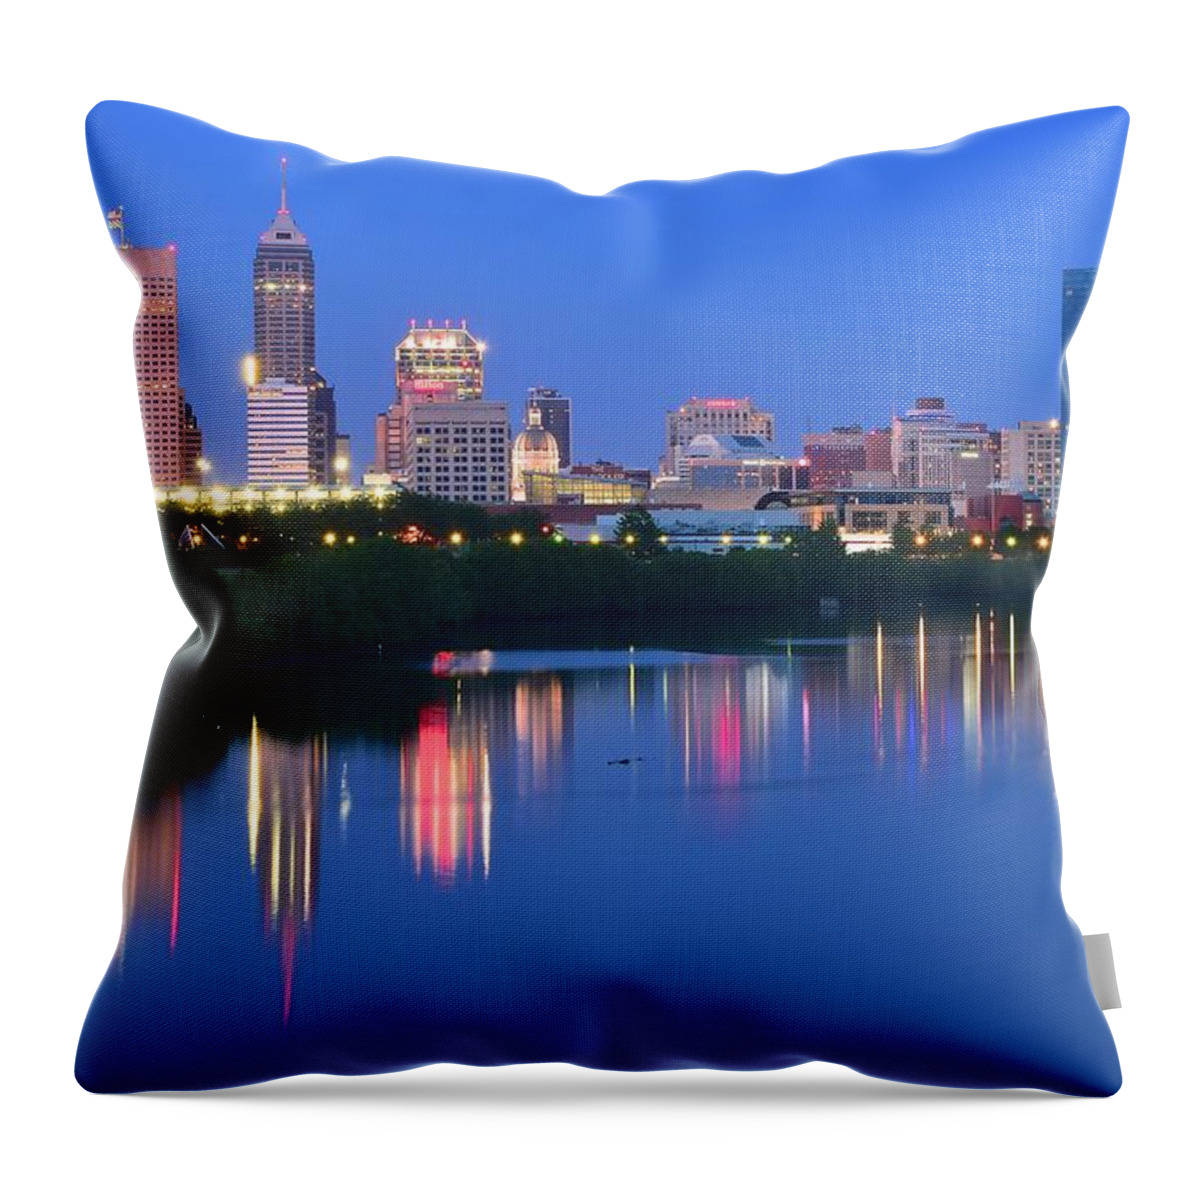 Indianapolis Throw Pillow featuring the photograph Riverside View of Indianapolis by Frozen in Time Fine Art Photography